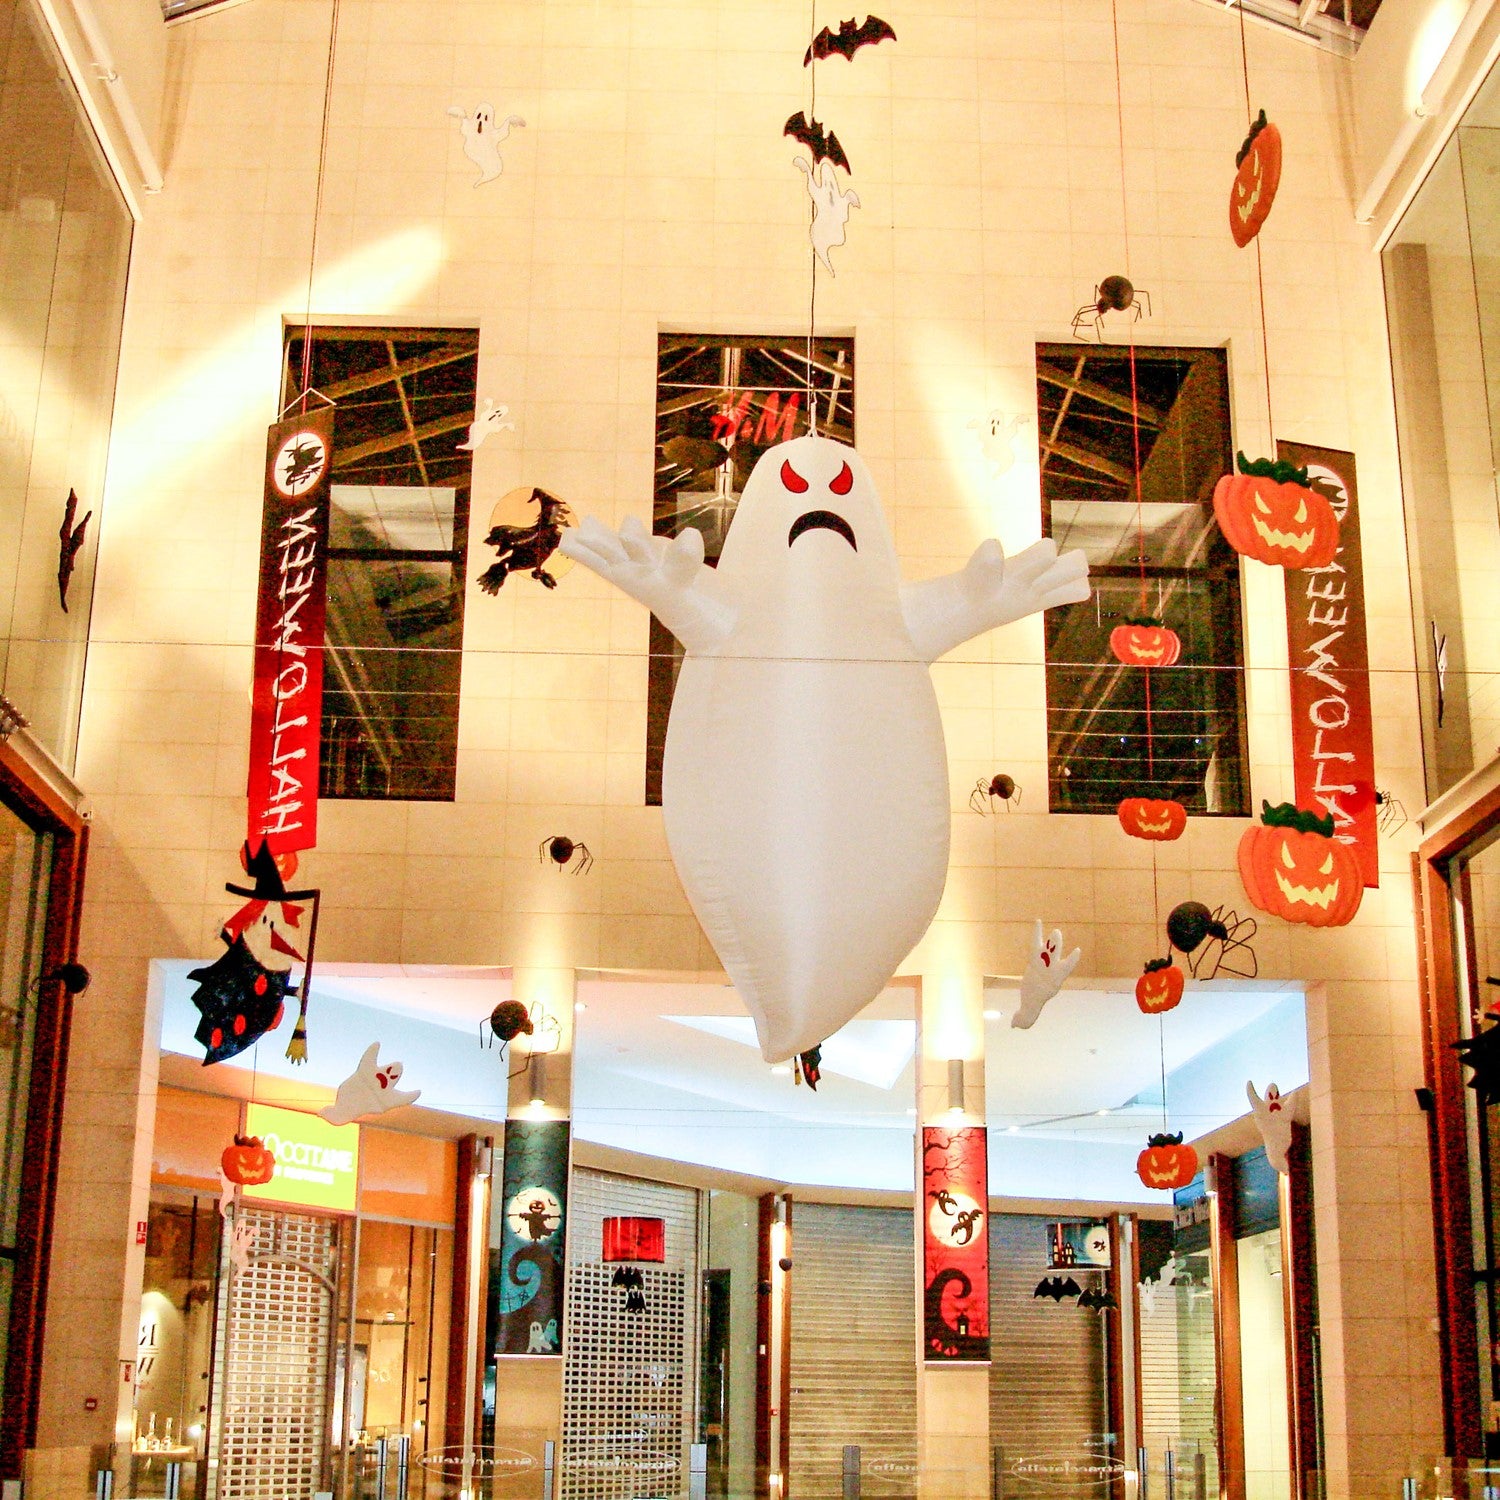 A giant inflatable ghost decoration hangs in a shopping mall Halloween display.